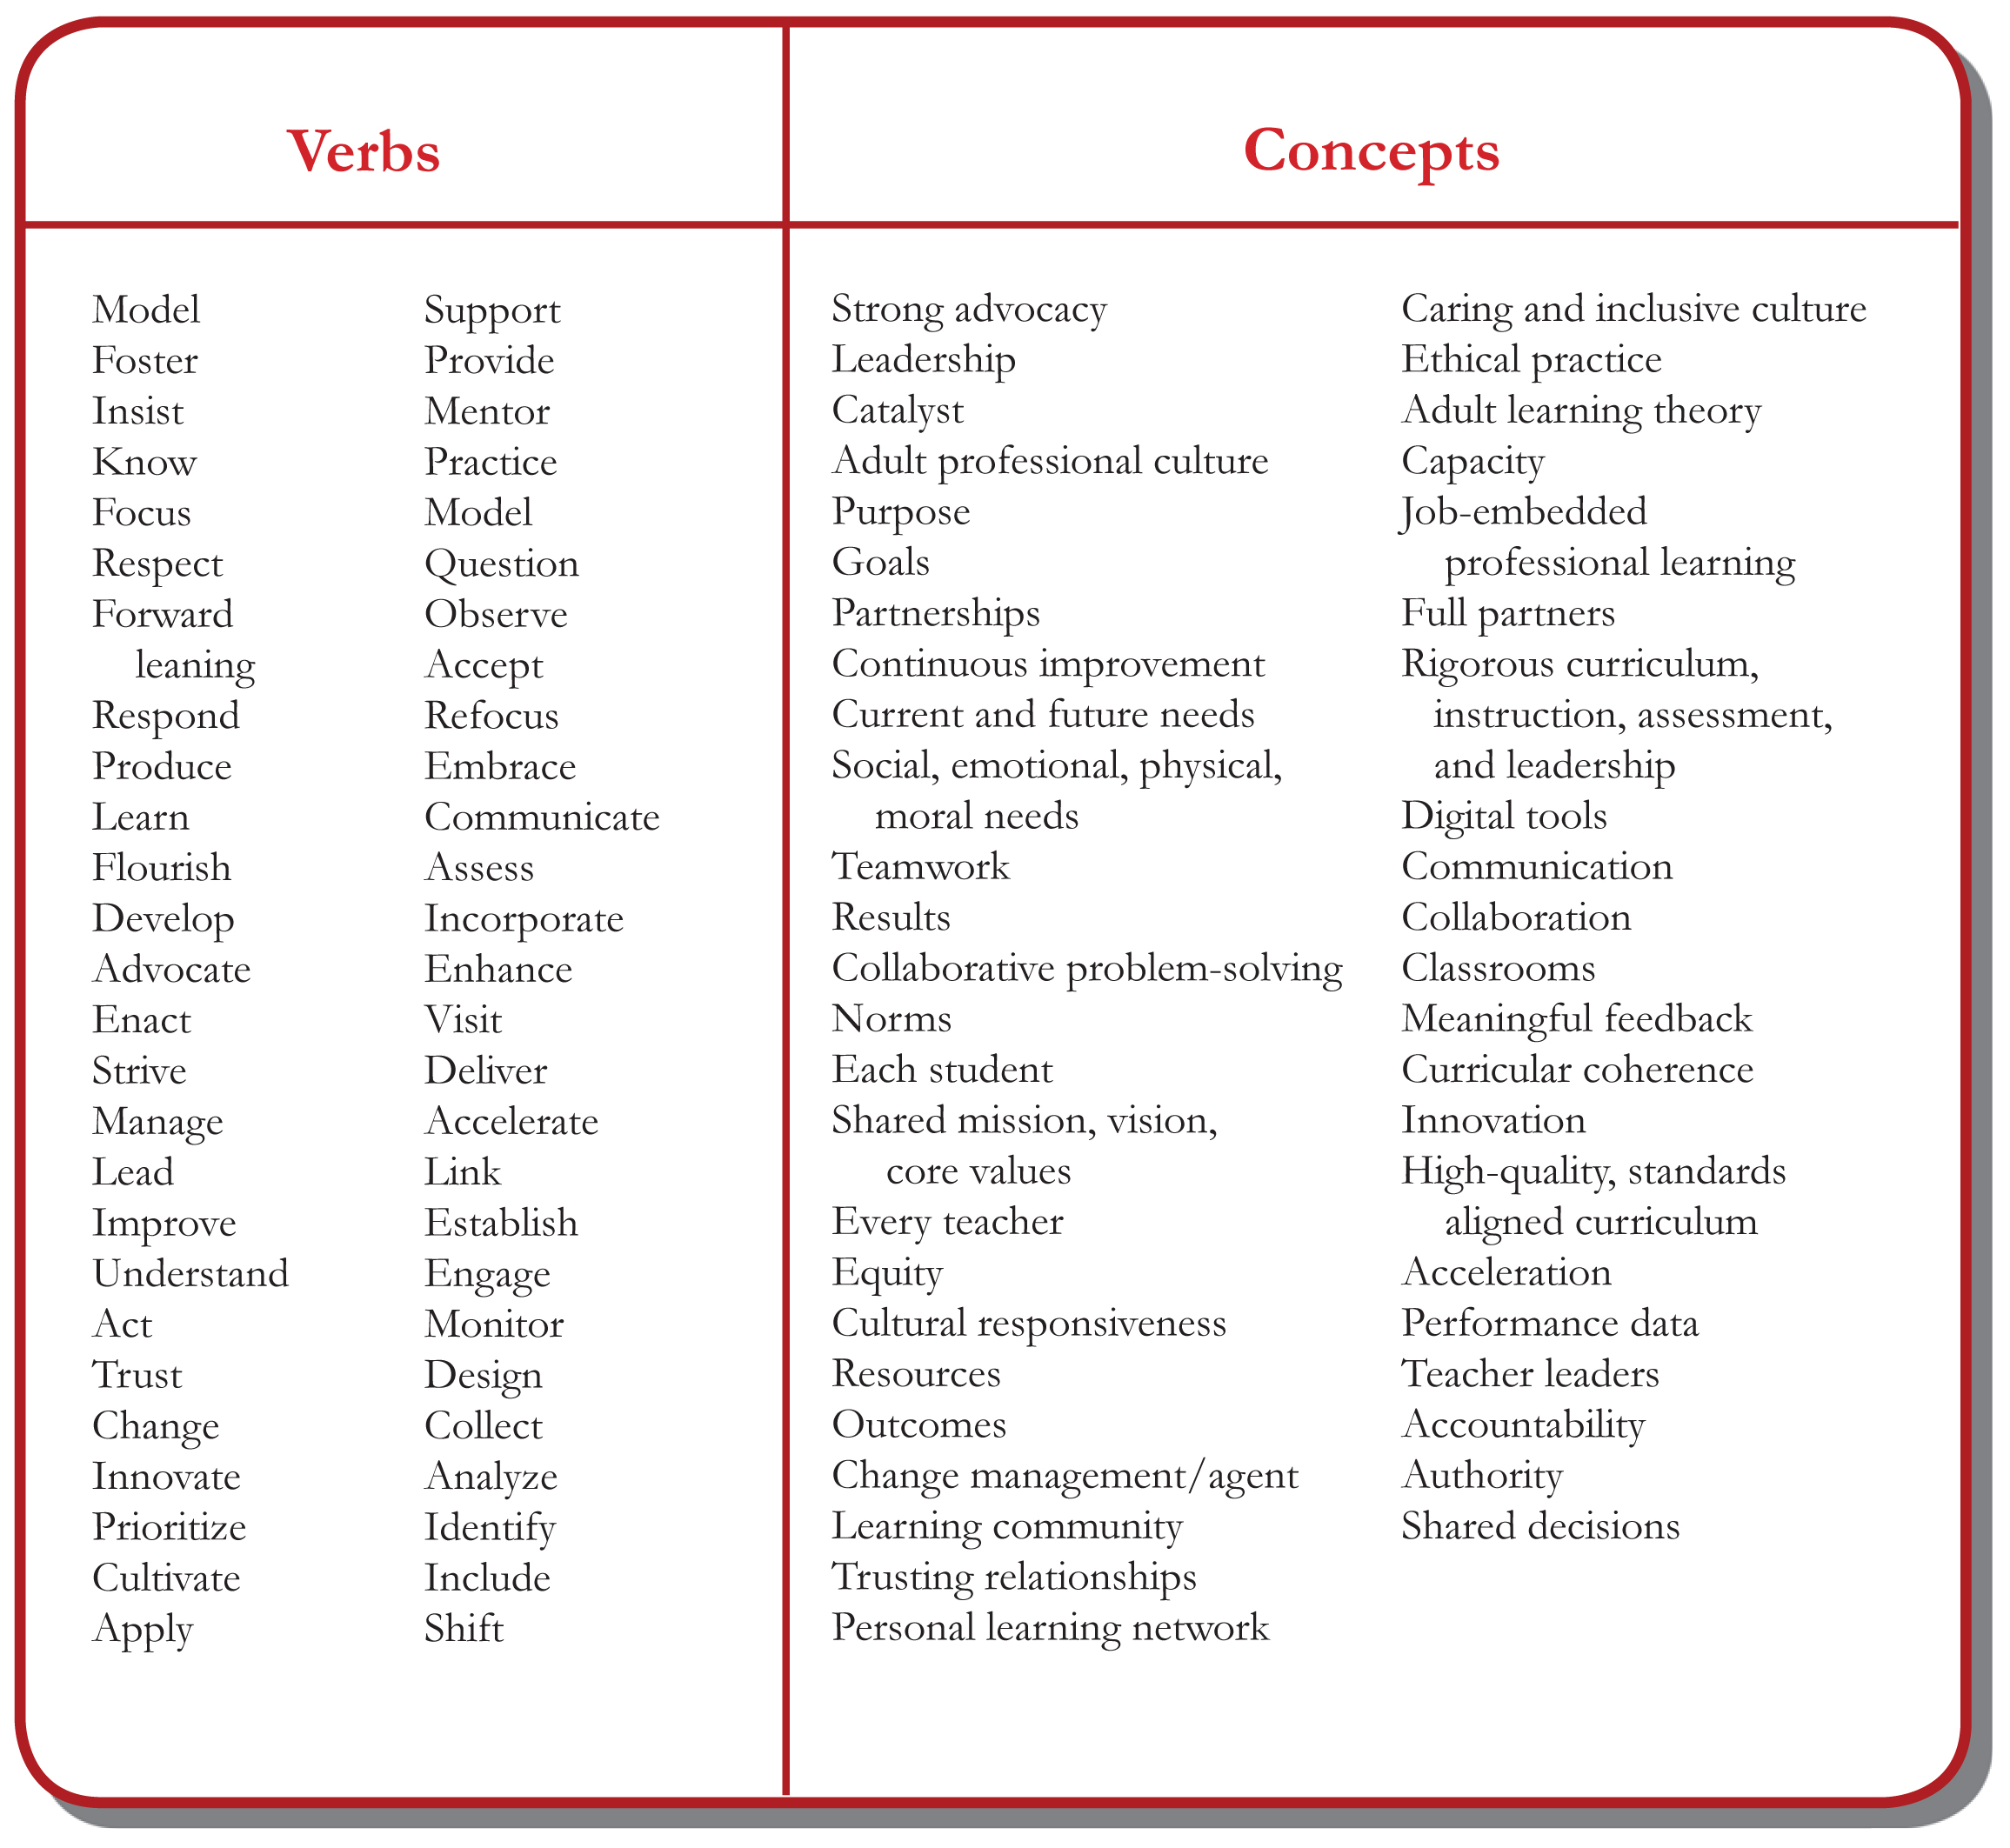 Verbs and Concepts